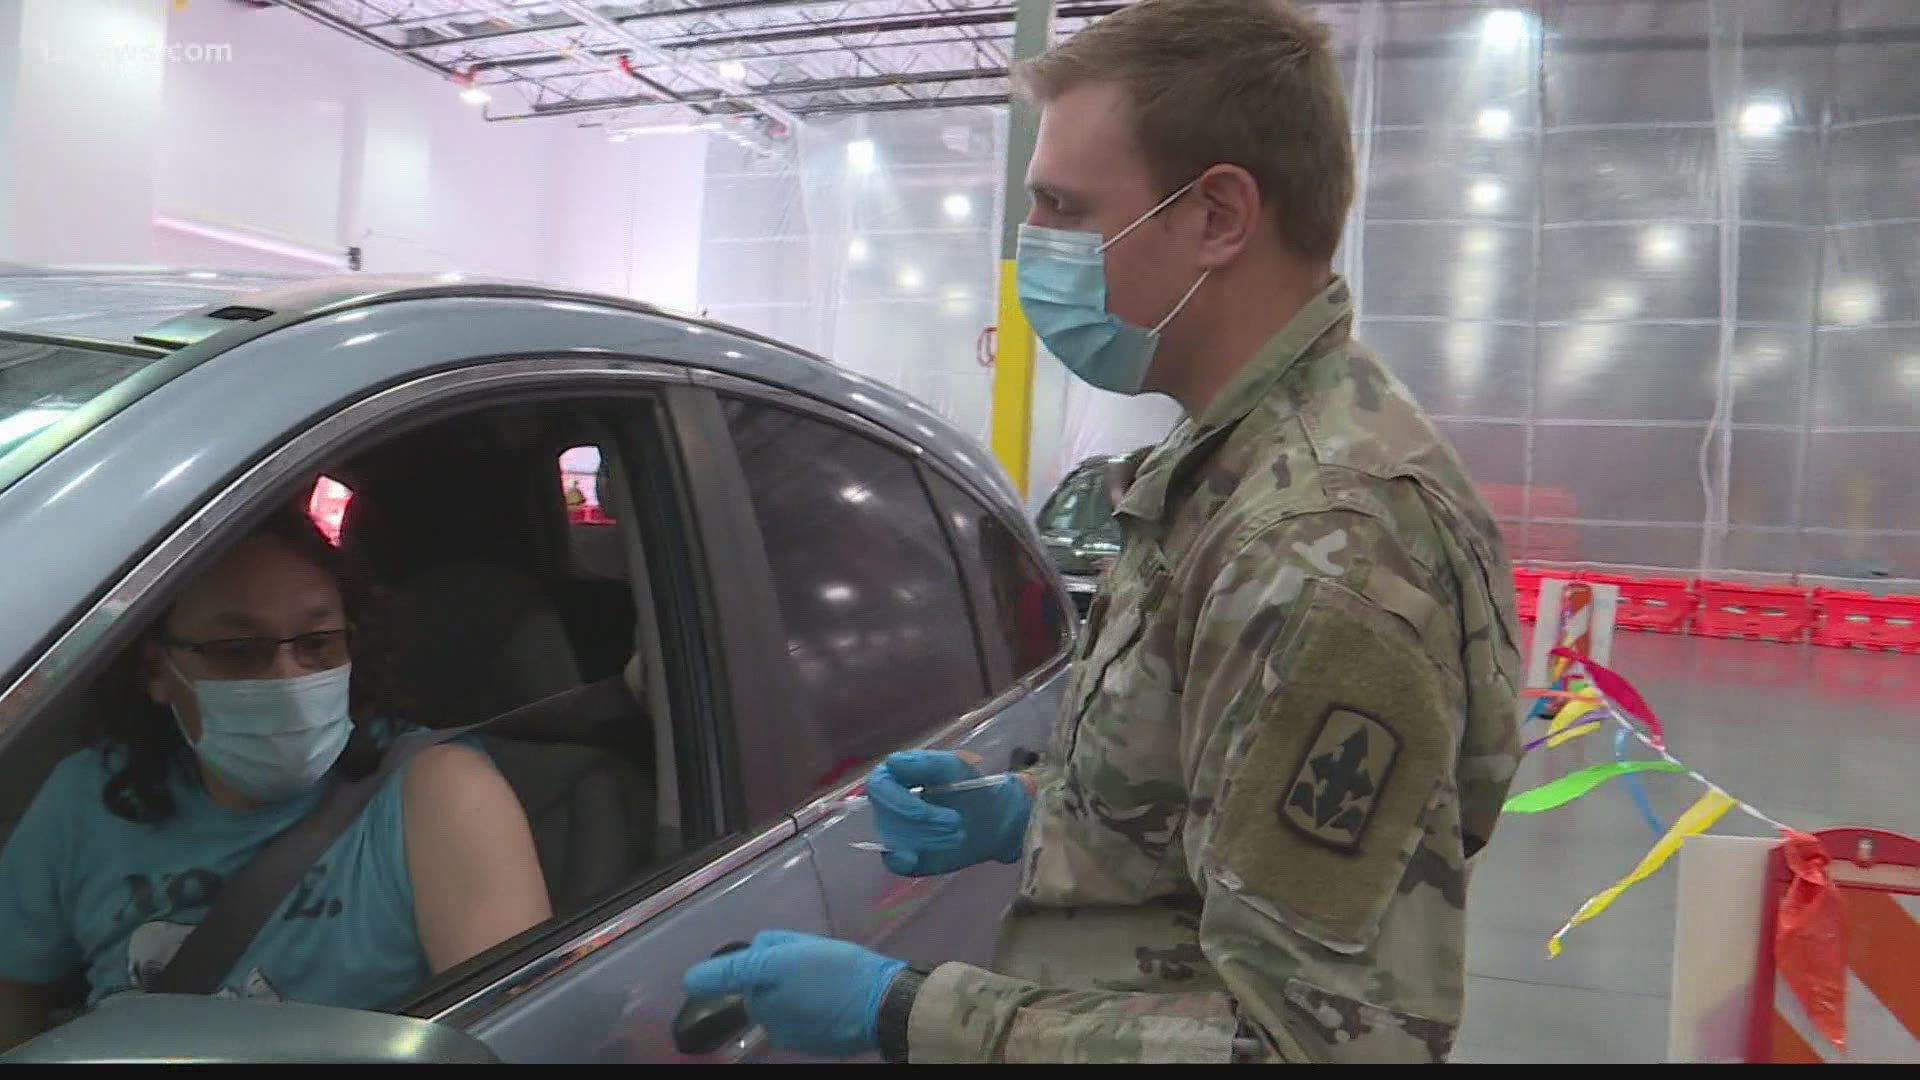 Arizona Army National Guard Specialist Noah Herriman has had a lifelong dream to enter the medical field. He's using his military service to accomplish his goal.